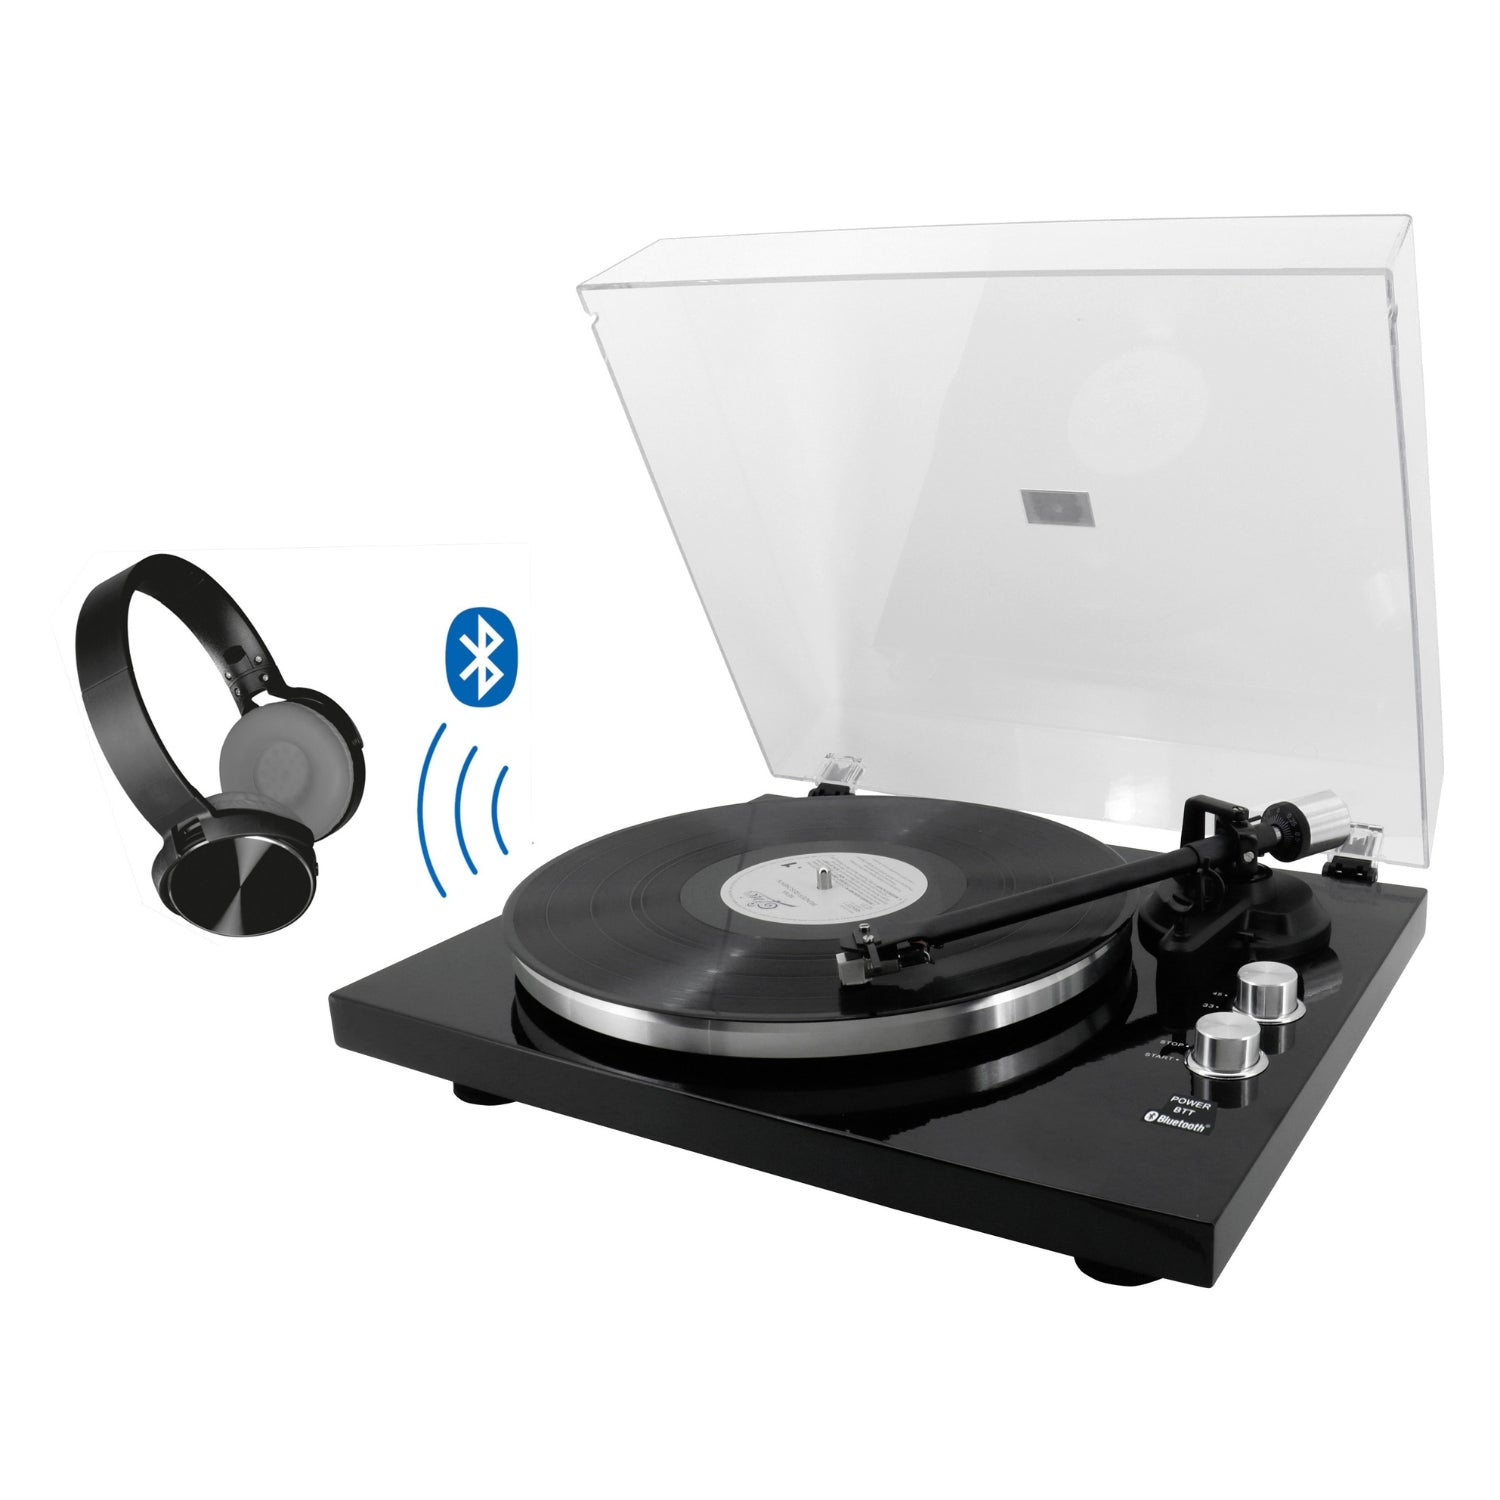 Soundmaster EliteLine PL790SW turntable with Audio Technica magnetic pickup system and Bluetooth transmission